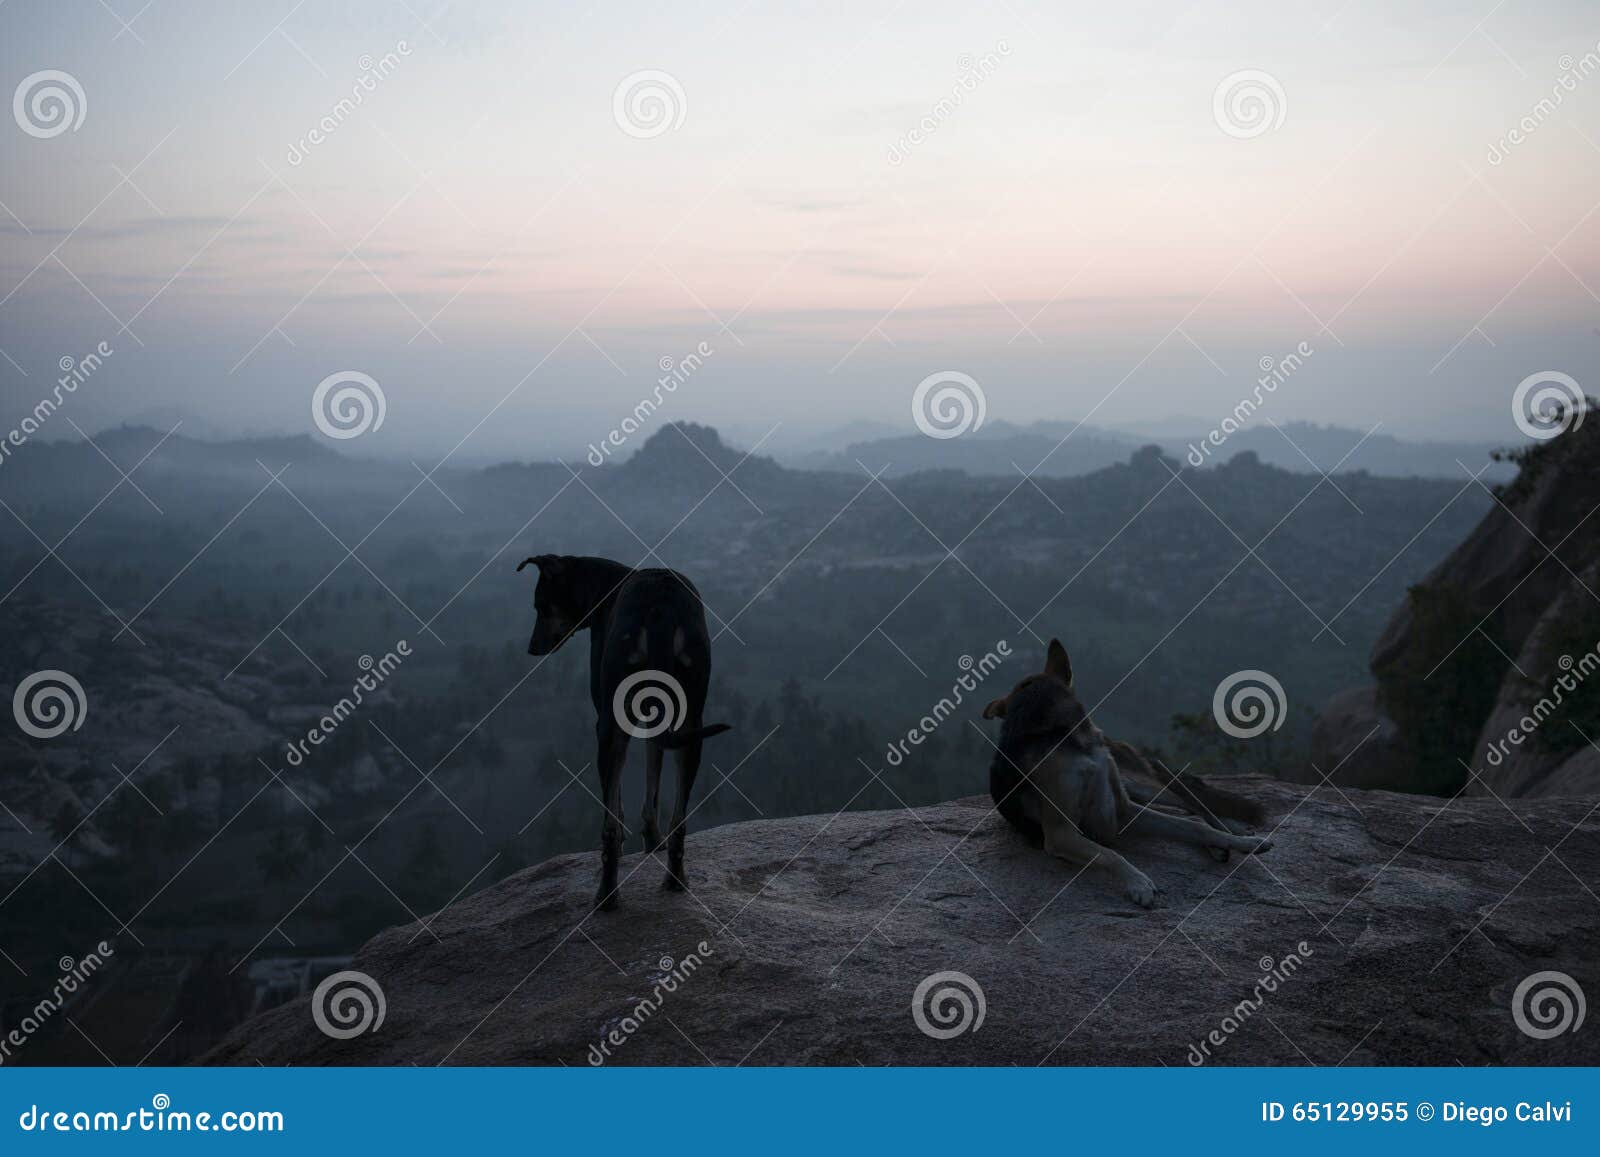 two dogs watching the sunrise. hampi, india